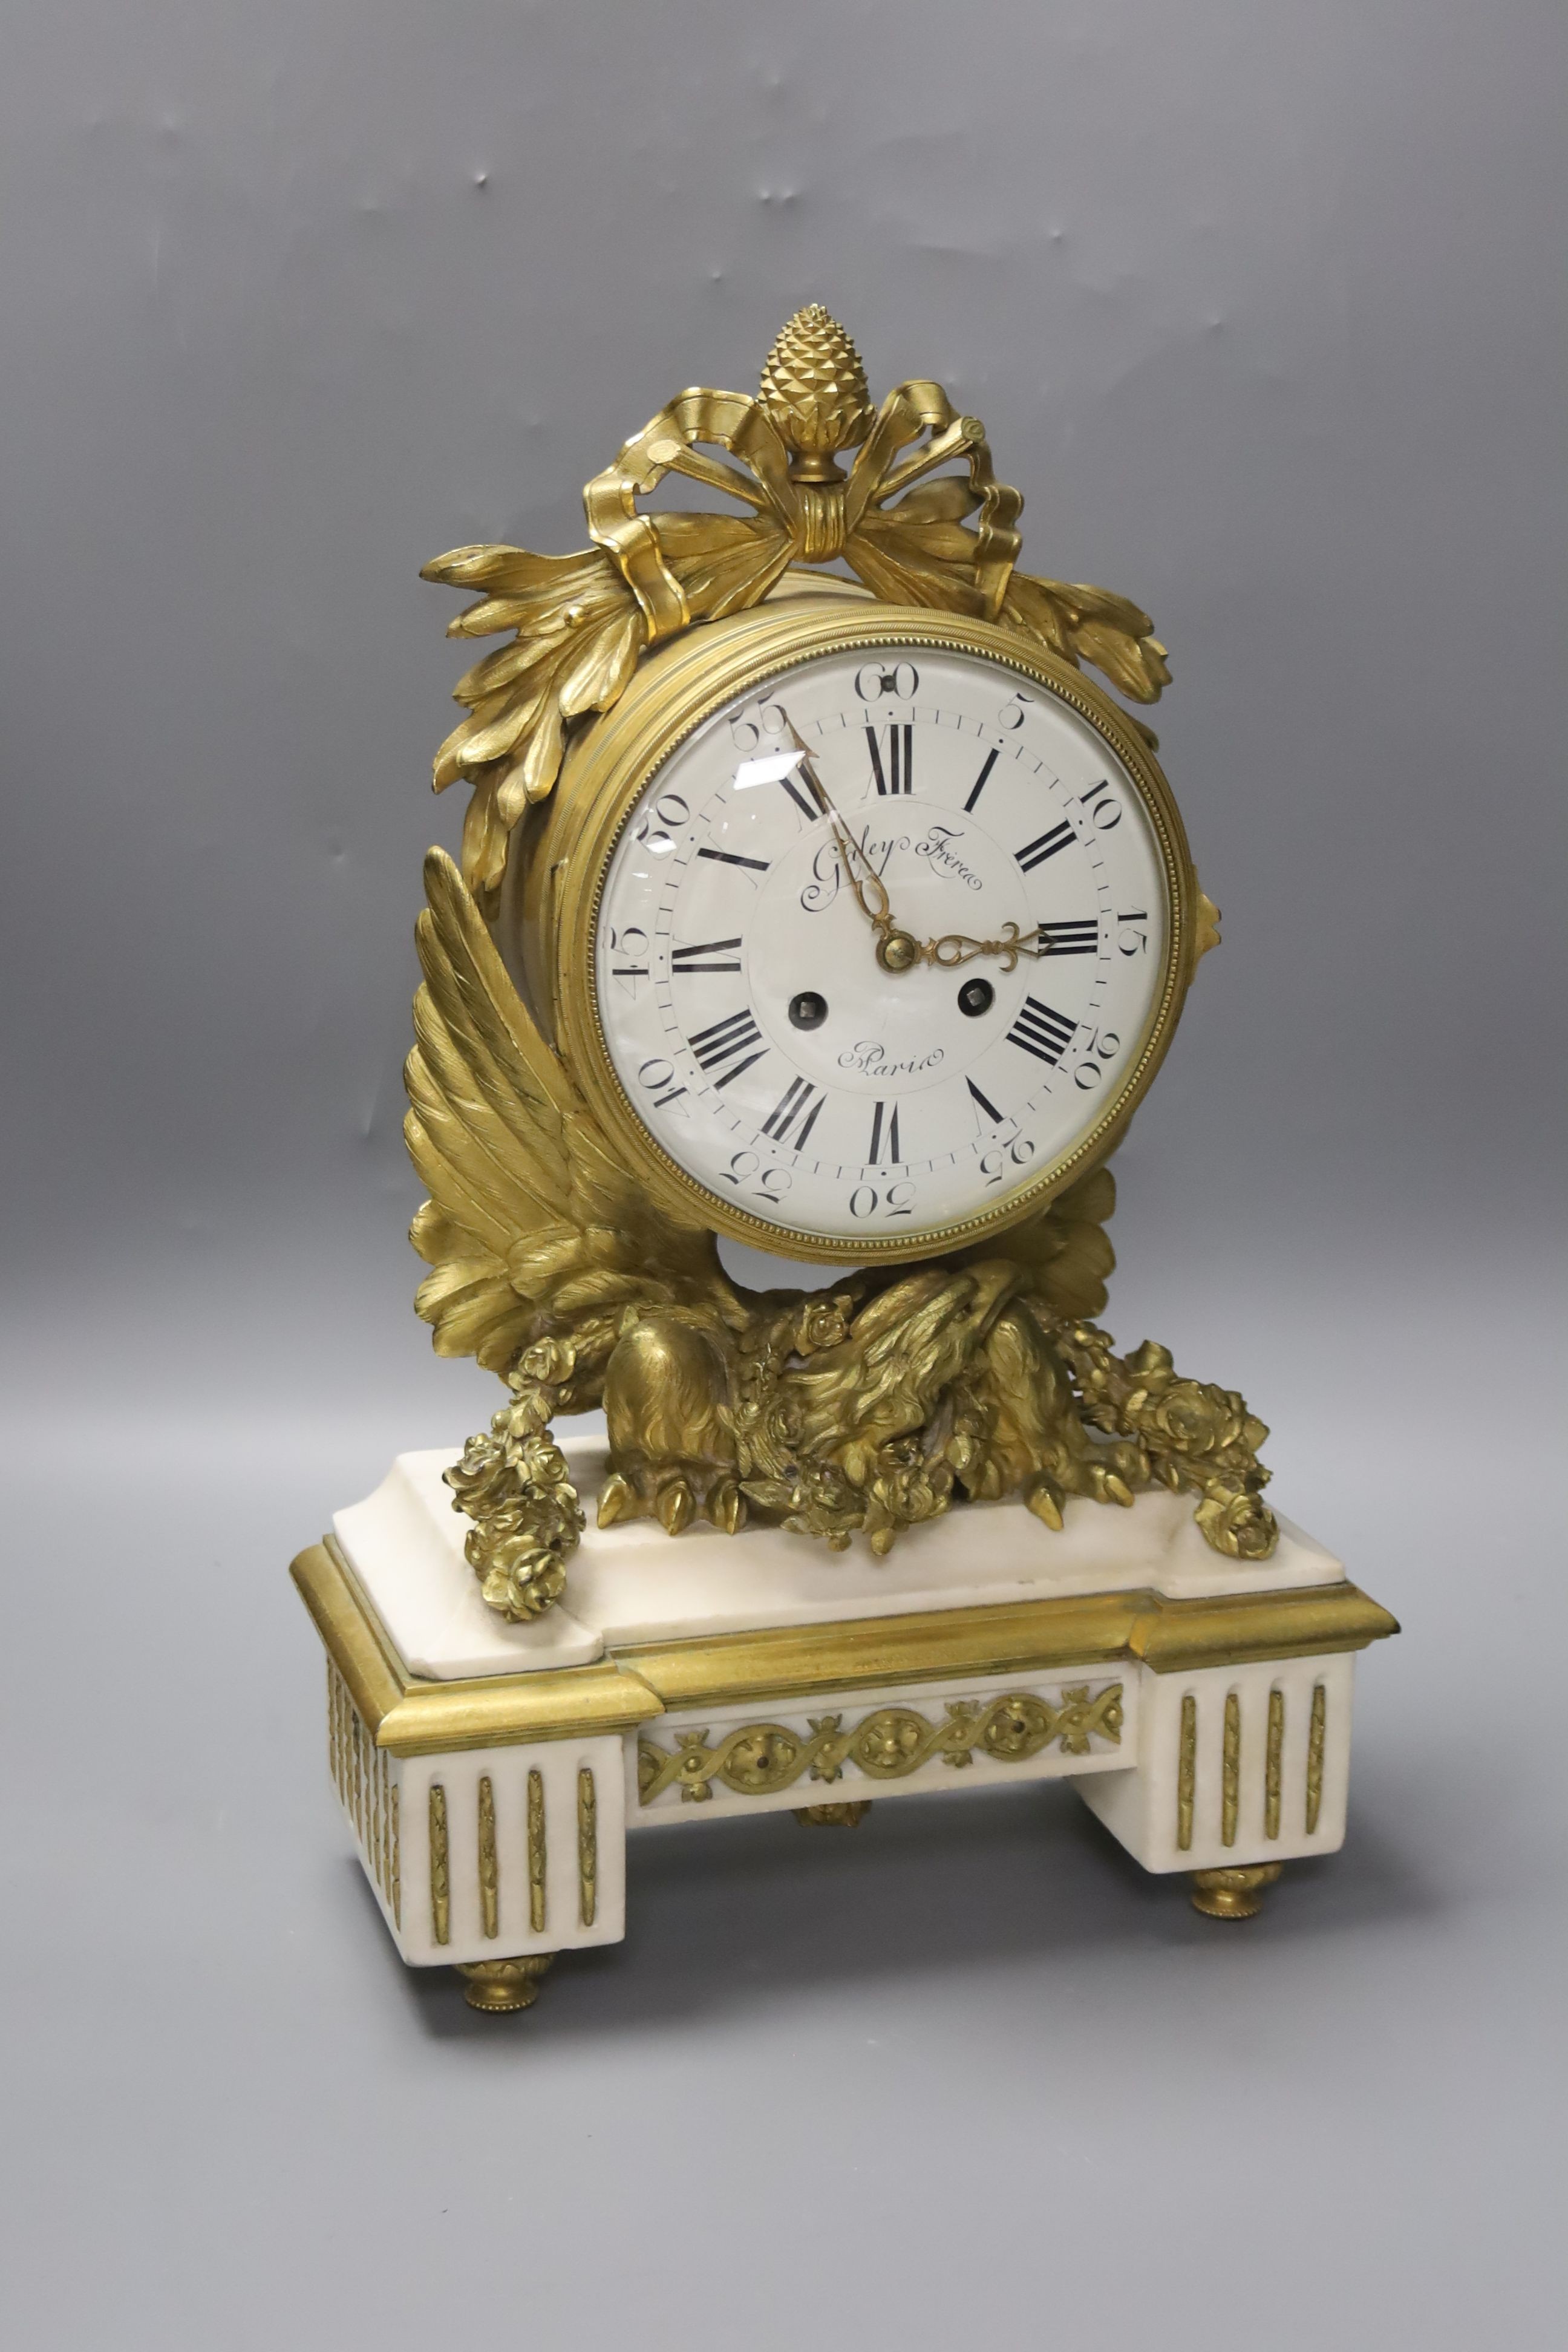 A French ormolu and white marble mantel clock, the case late 18th century, the movement late 19th century 41 cm high